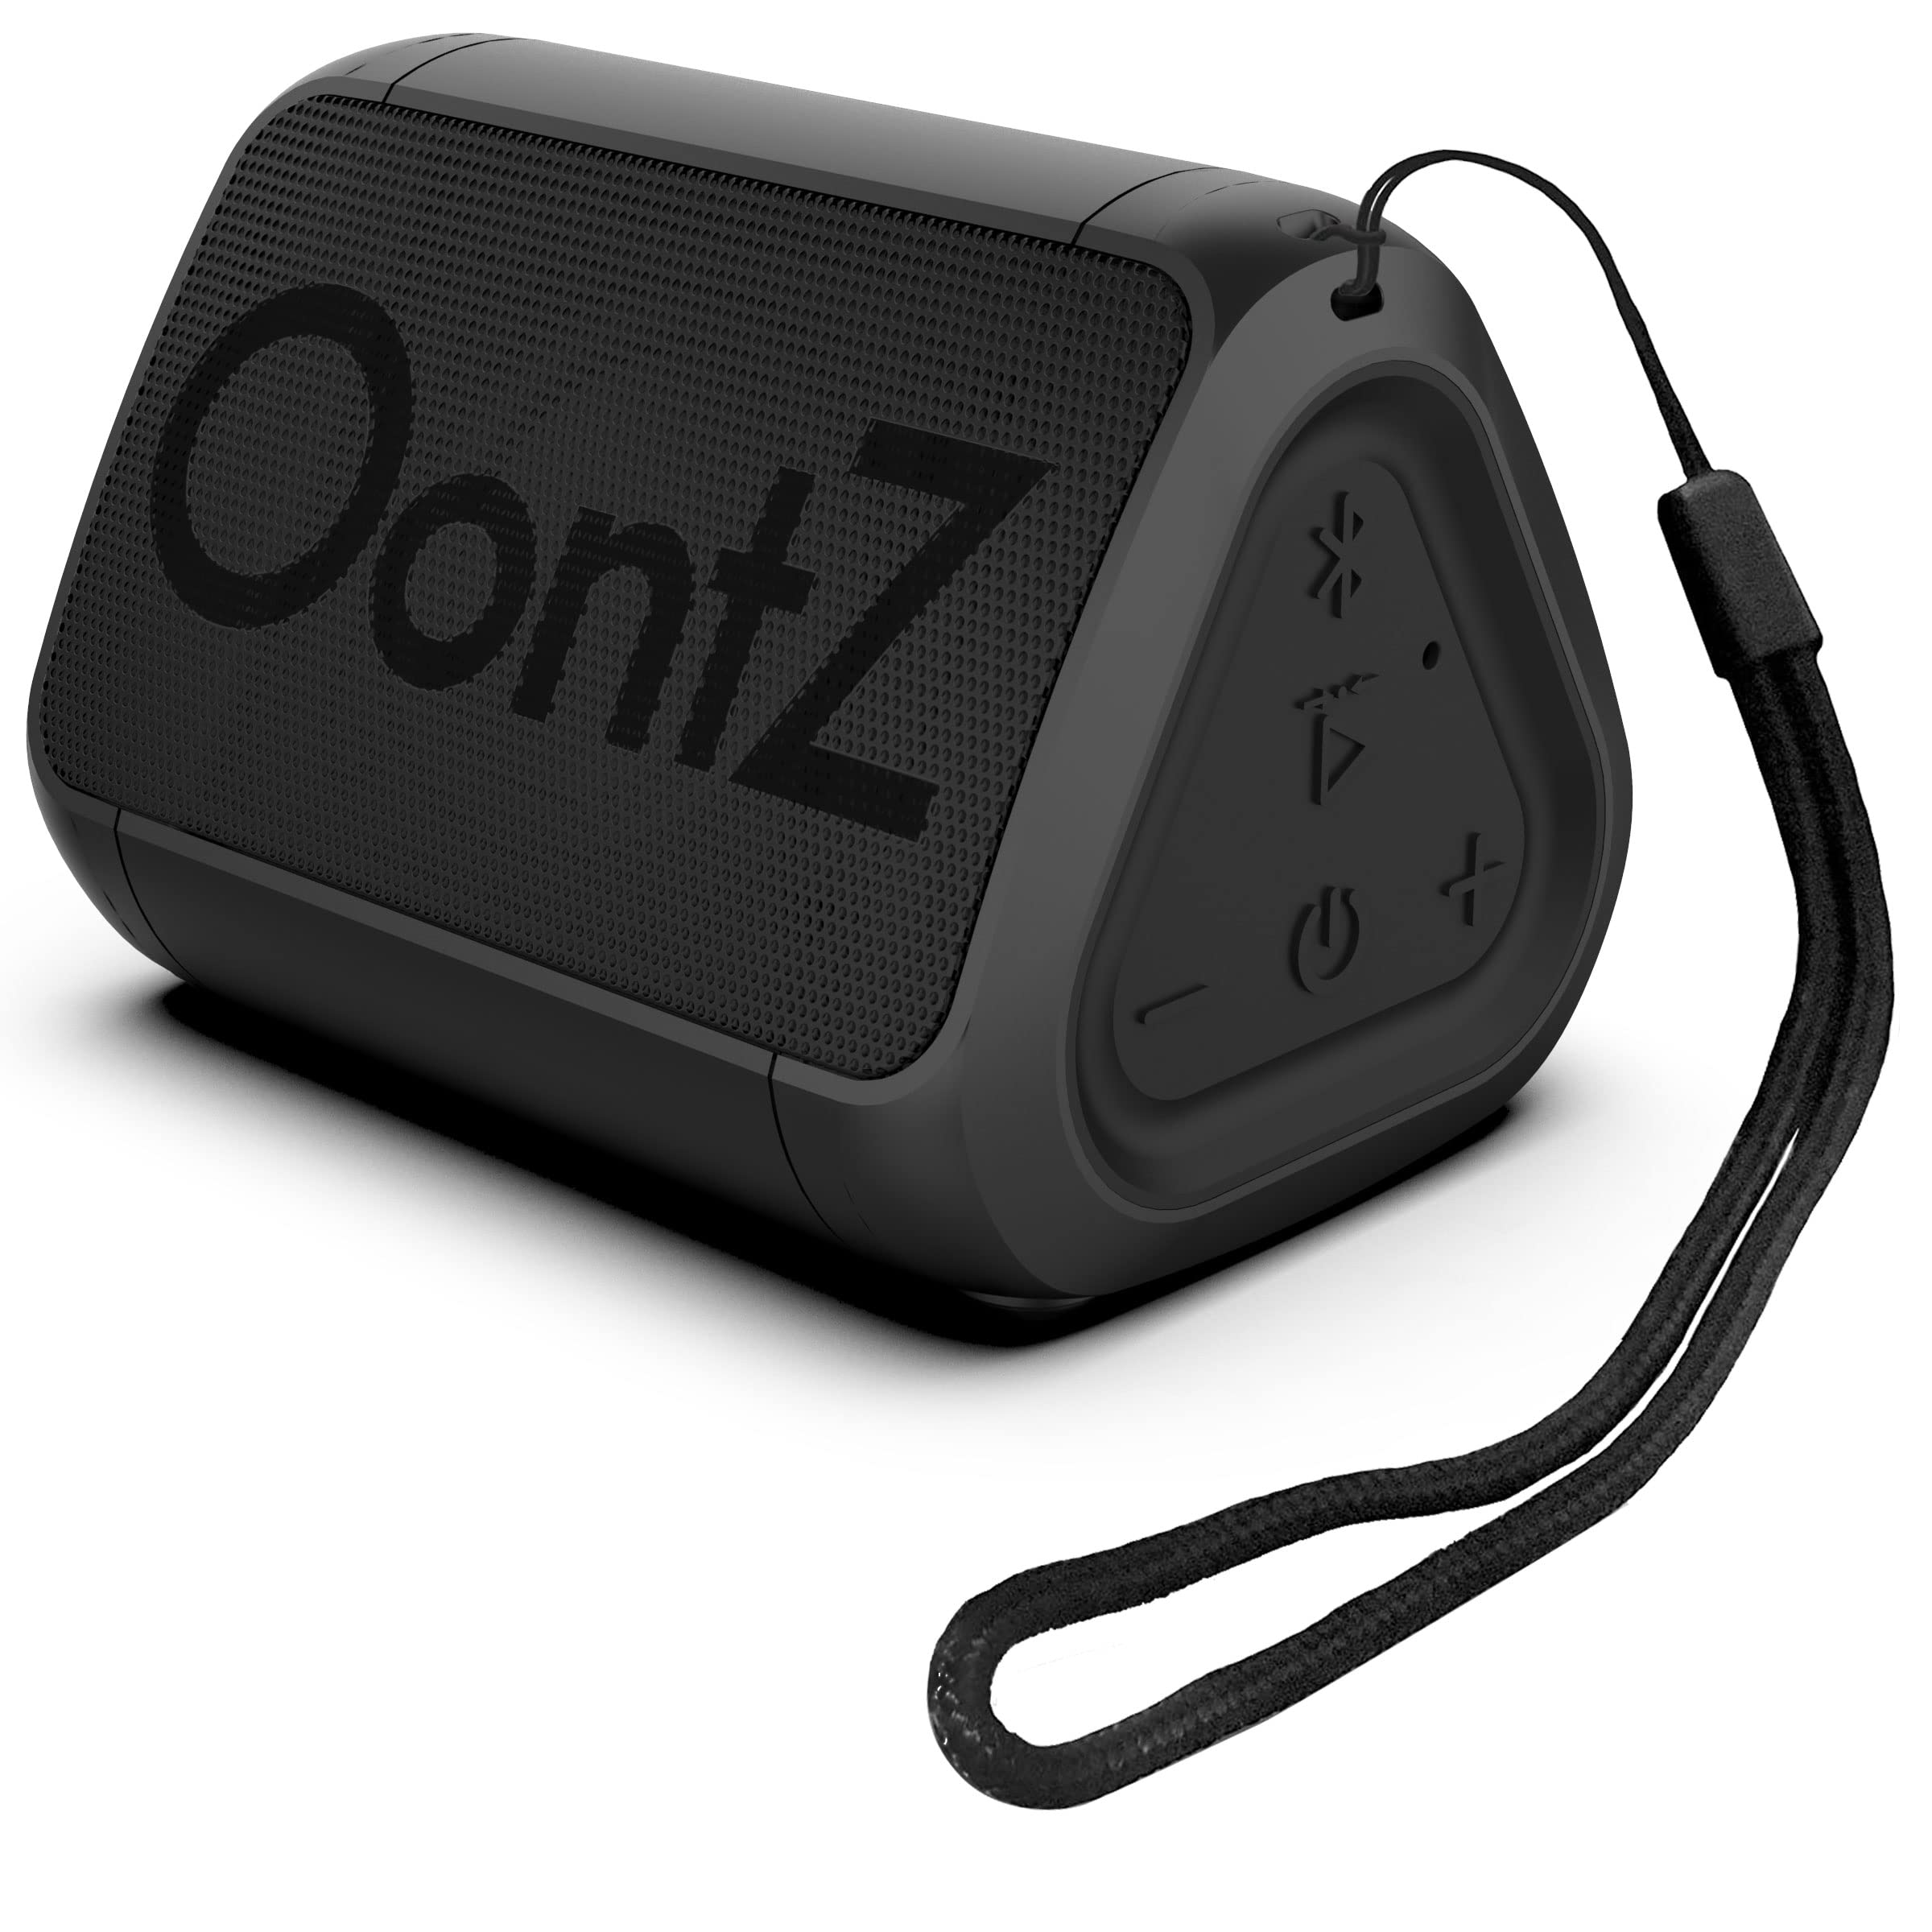  Cambridge SoundWorks OontZ Angle Solo - Bluetooth Portable Speaker, Compact Size, Surprisingly Loud Volume & Bass, 100 Foot Wireless Range, IPX5, Perfect Travel Speaker, Bluetooth Speakers by Cambridge...